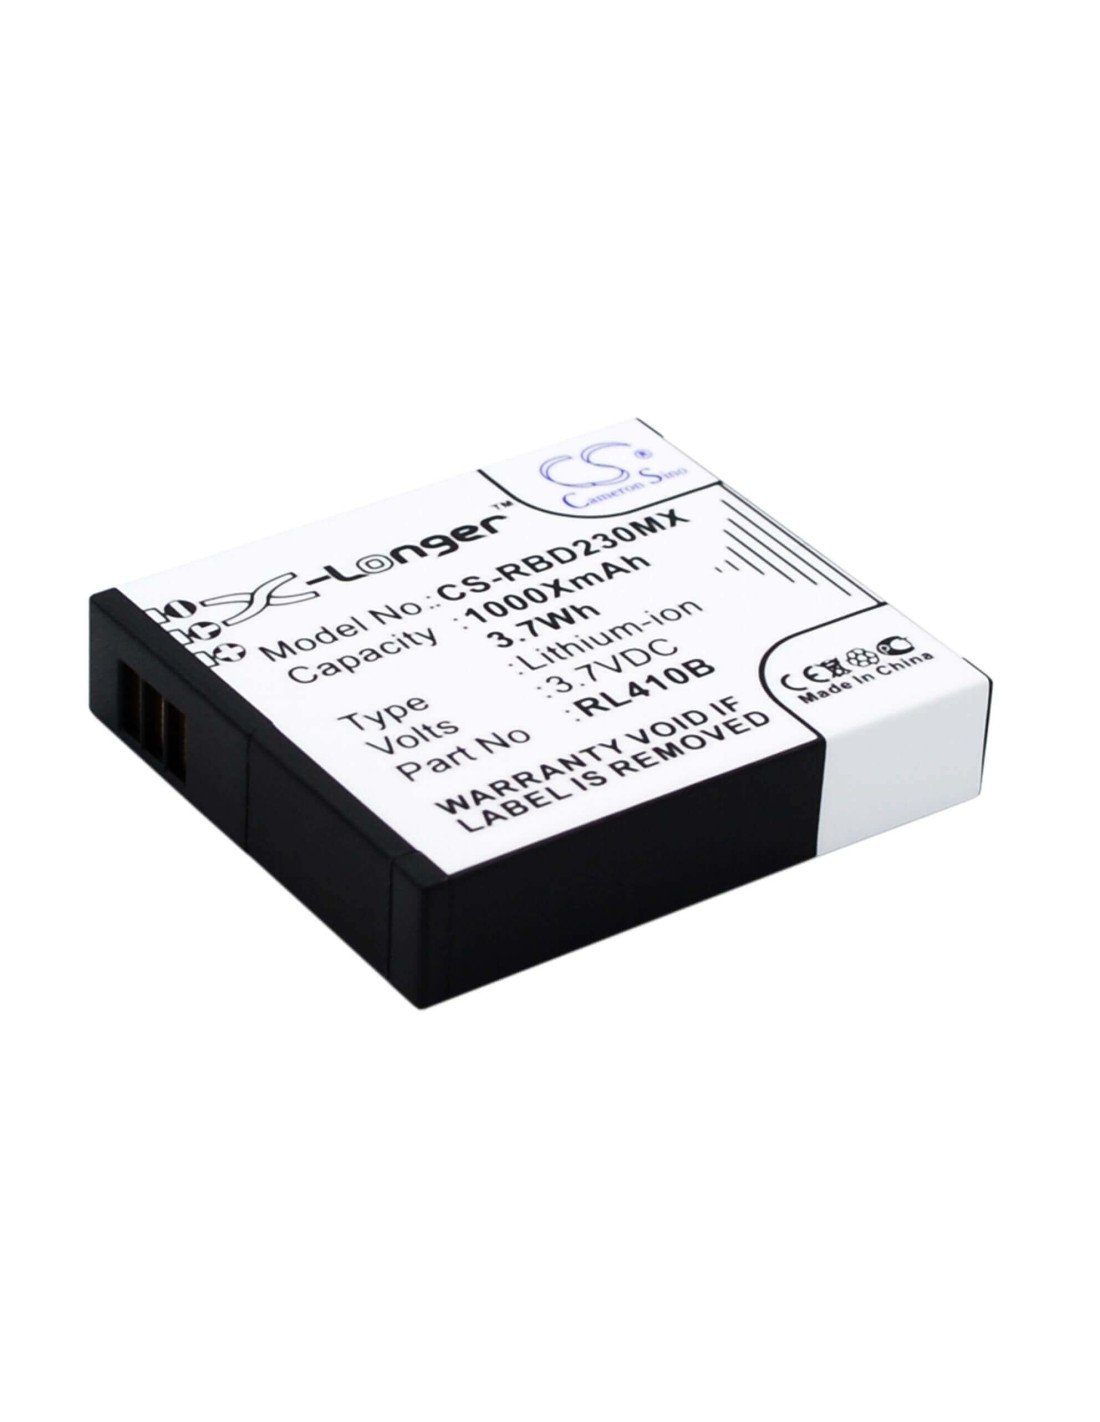 Battery for Rollei Actioncam 230, Actioncam 240, 3.7V, 1000mAh - 3.70Wh